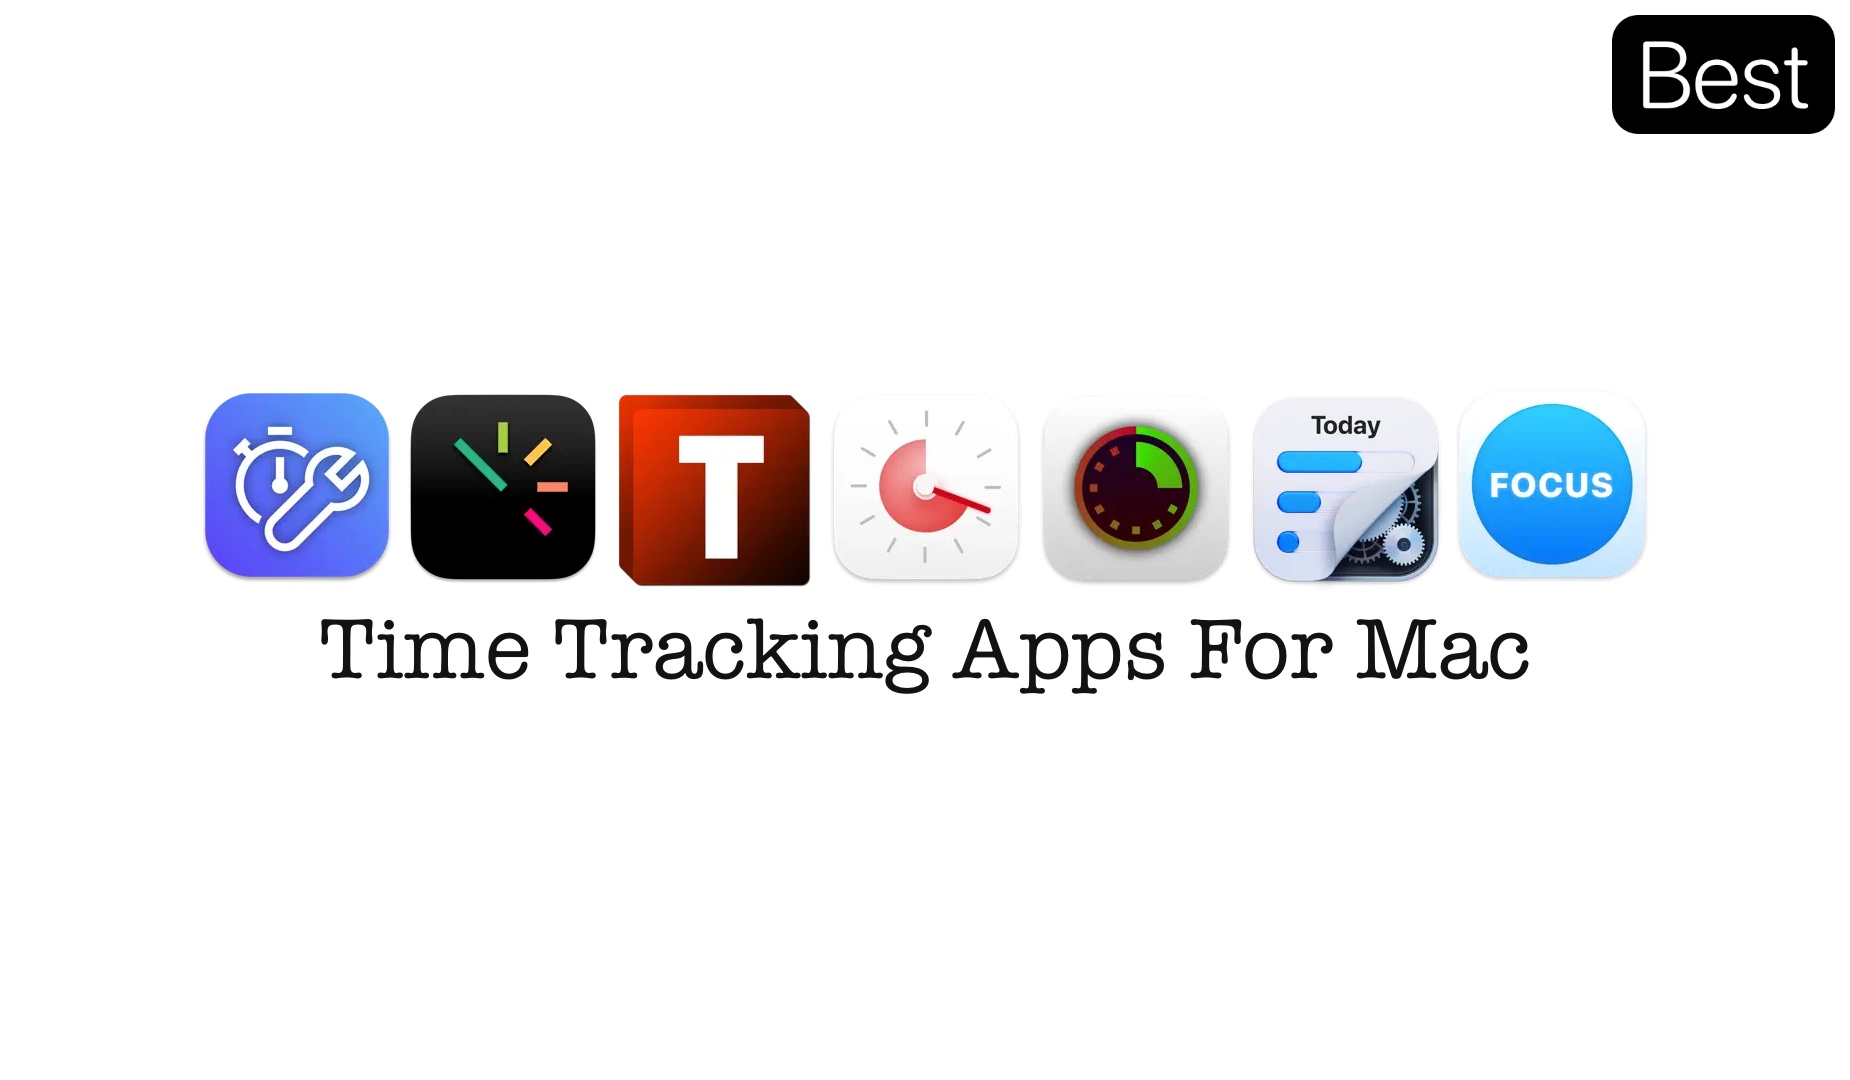 Best Multiple Timer Apps For iPhone, iPad, And Apple Watch - iOS Hacker